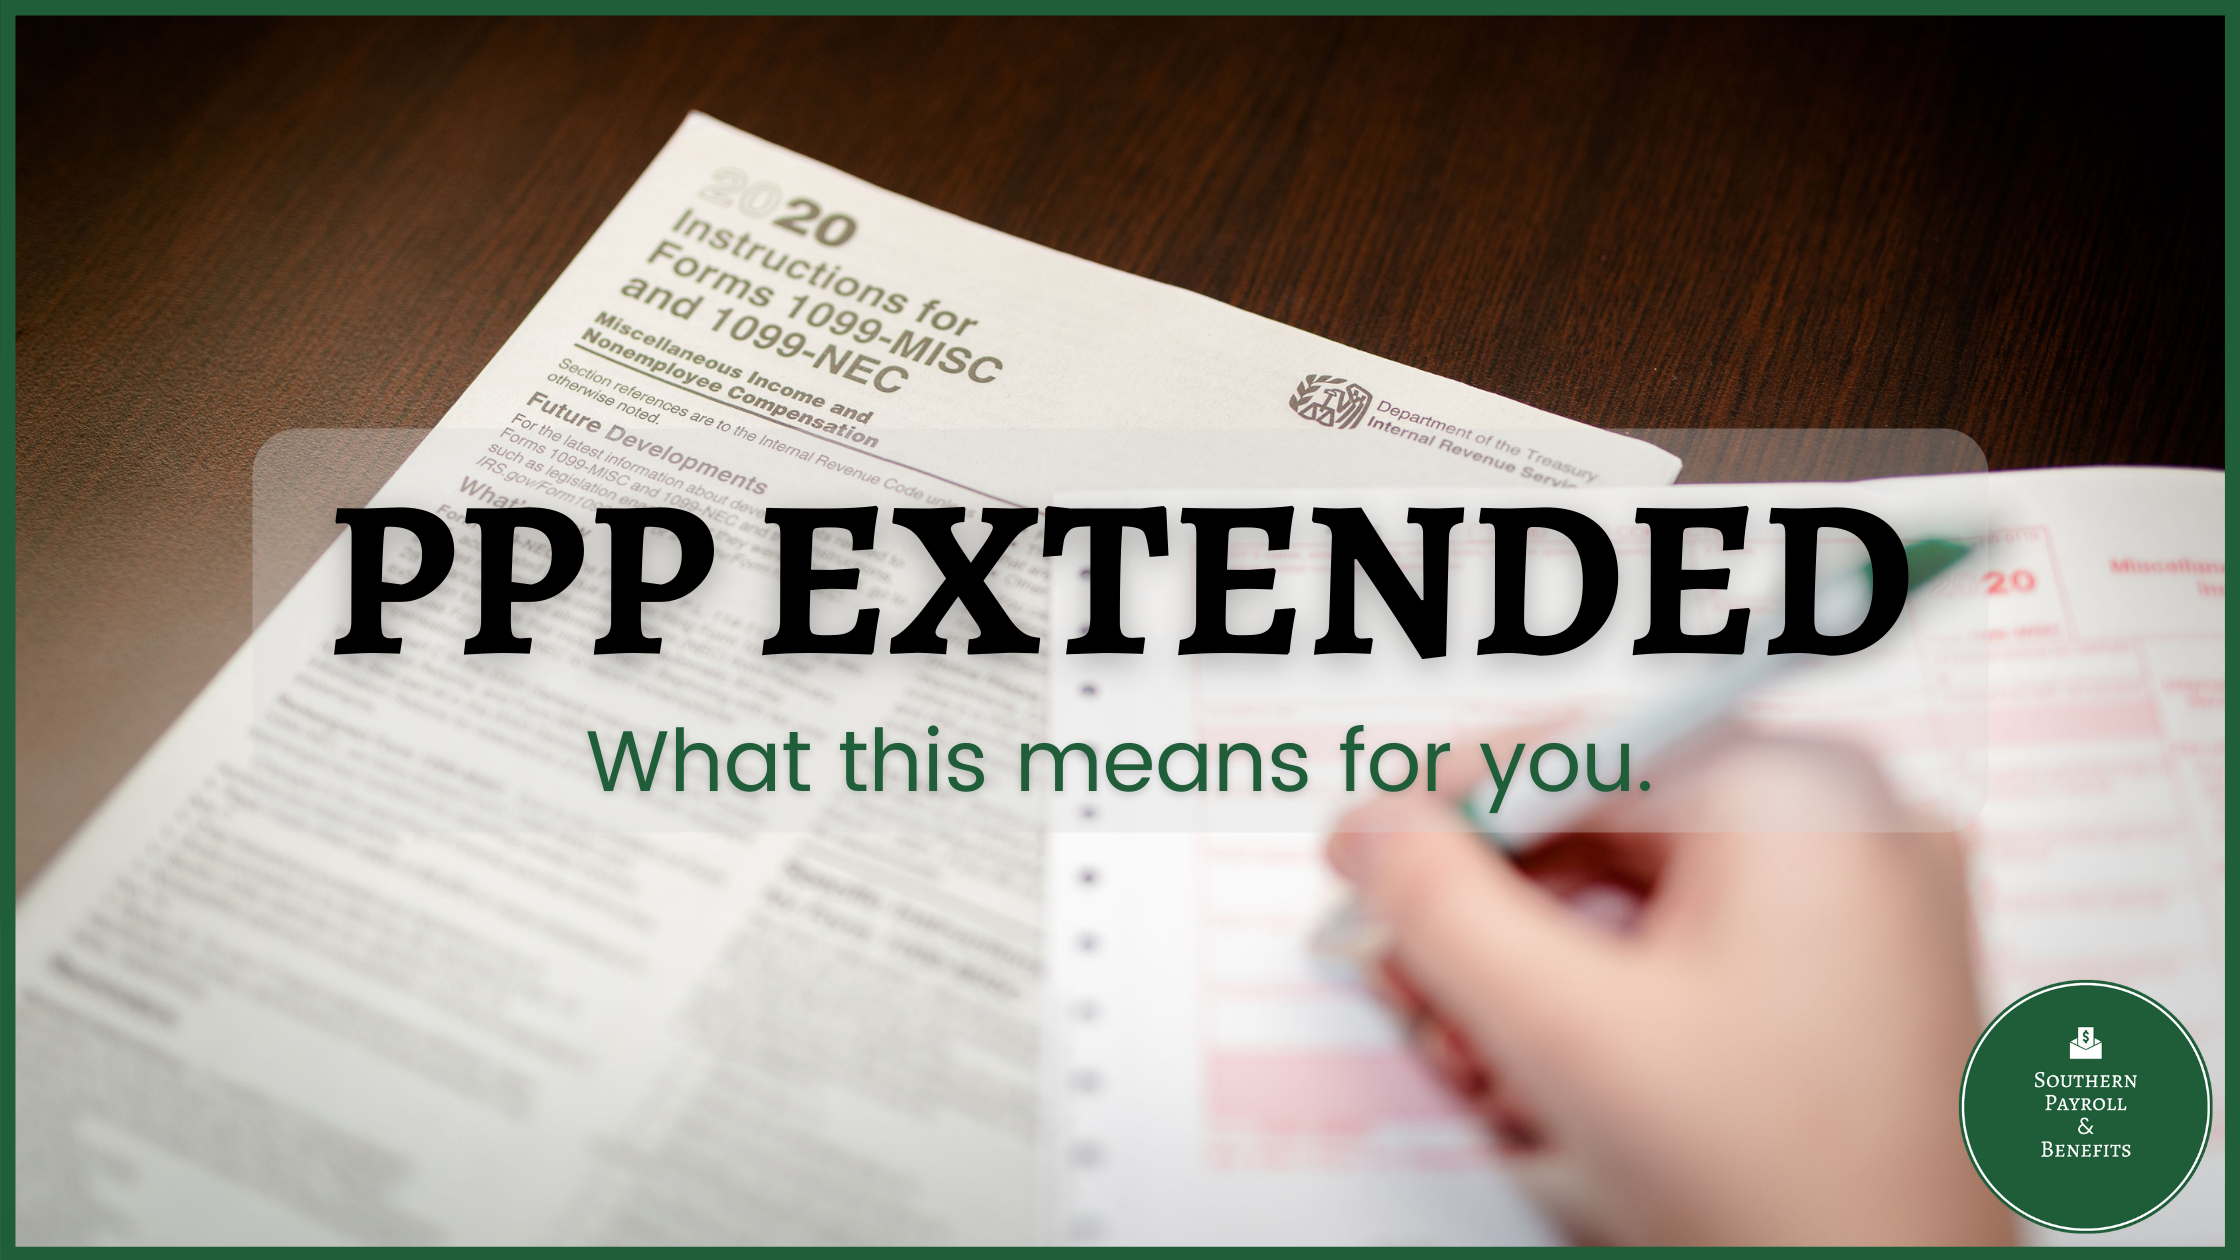 PPP Extended - What this means for you